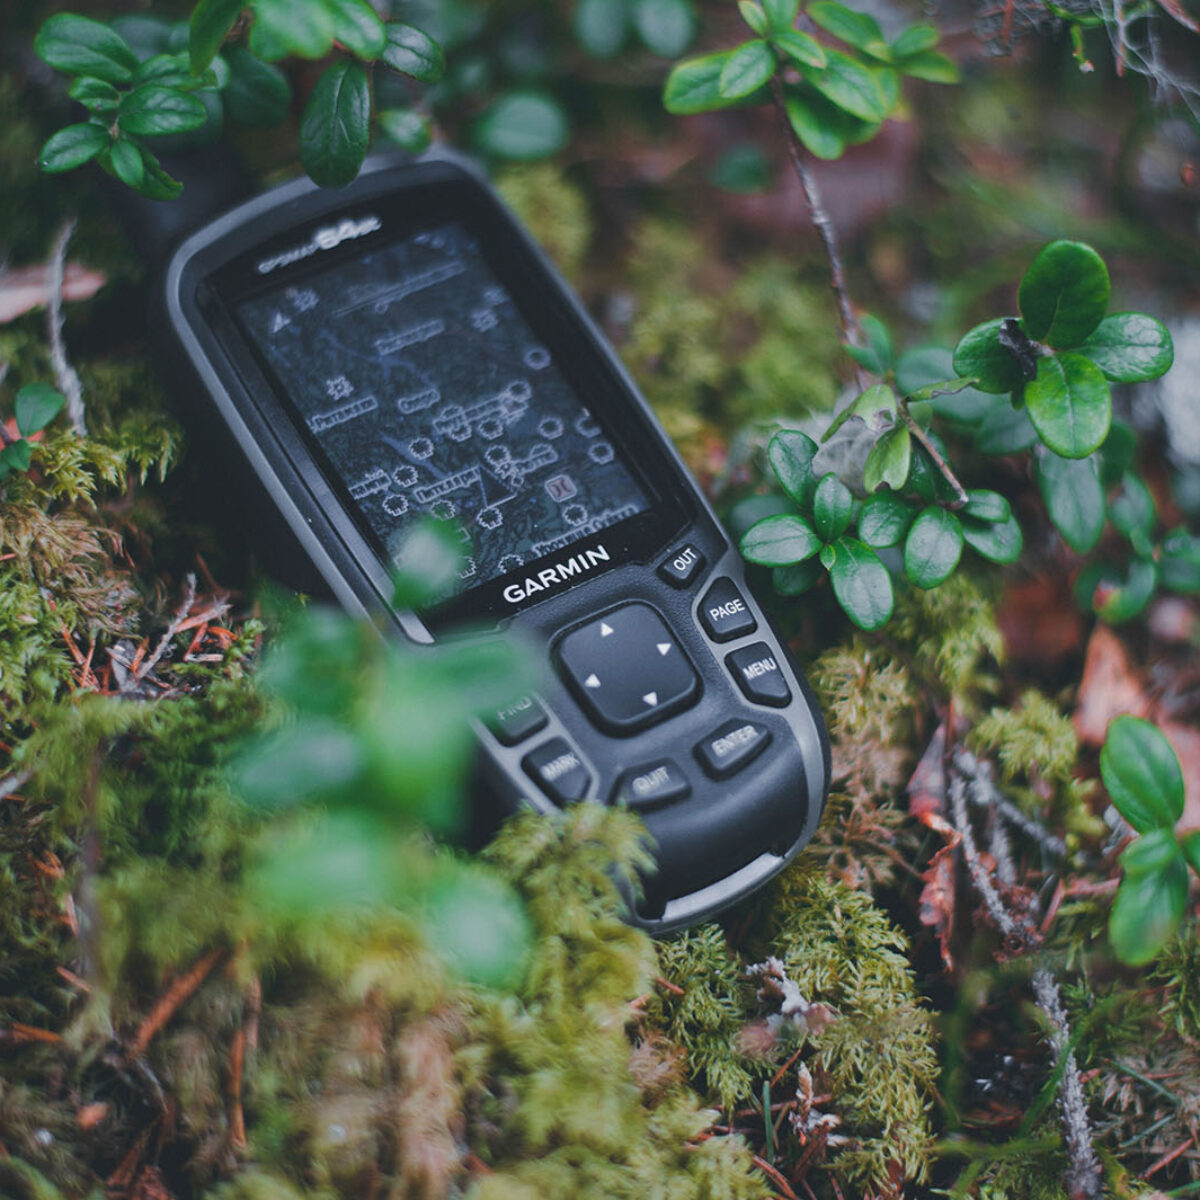 Garmin GPSMAP 67i review: I'm not smart enough for this handheld GPS